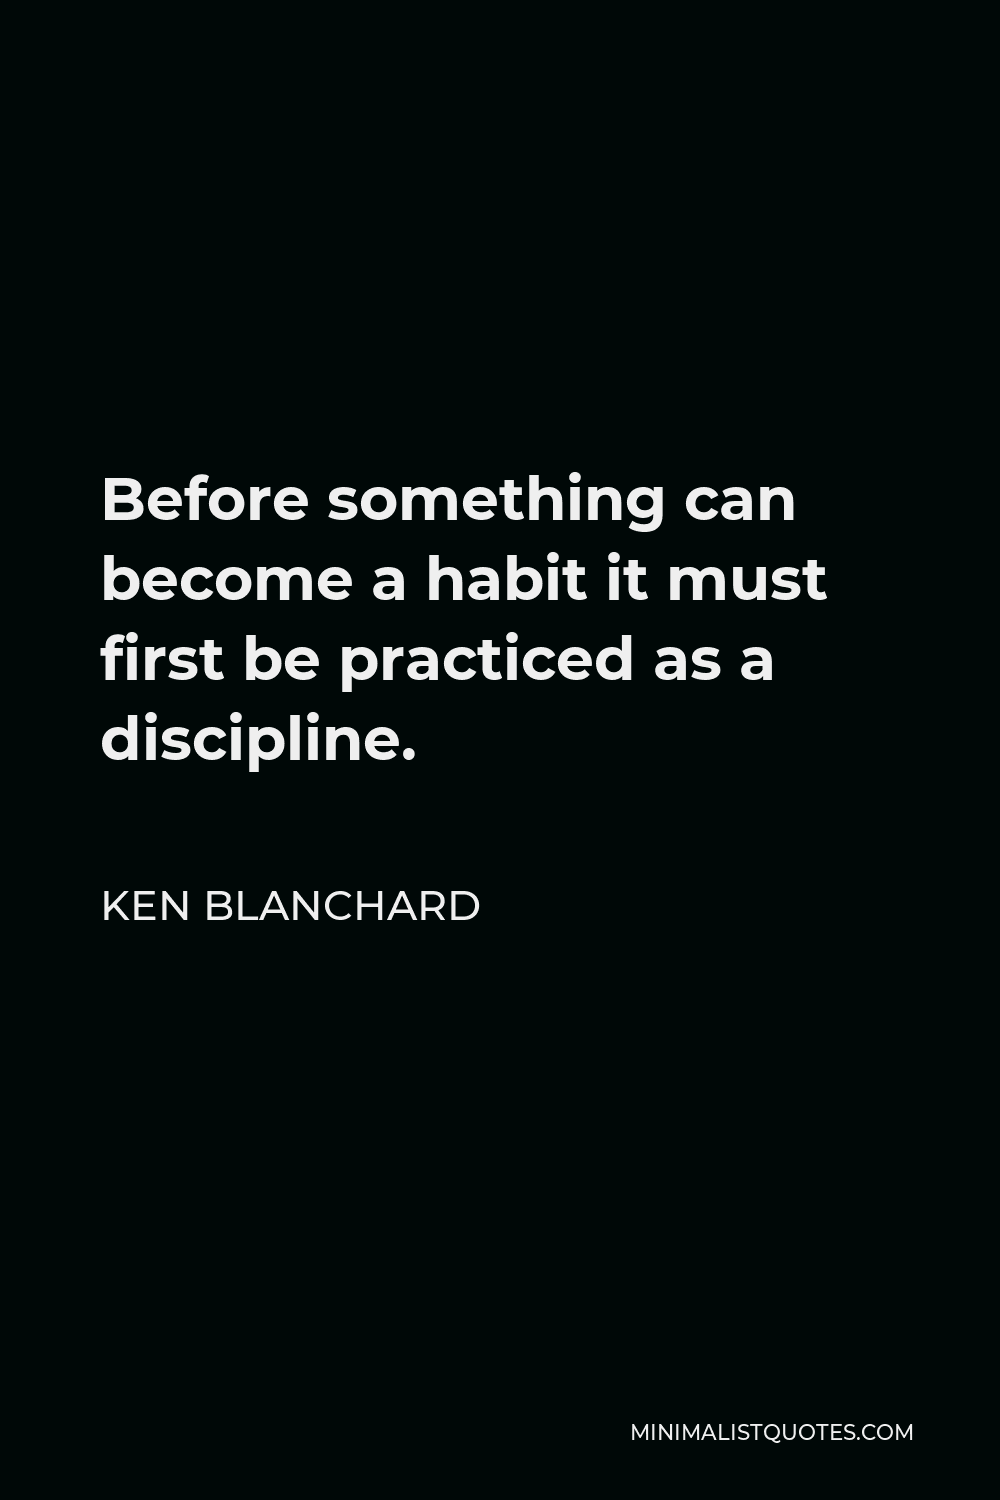 Ken Blanchard Quote - Before something can become a habit it must first be practiced as a discipline.